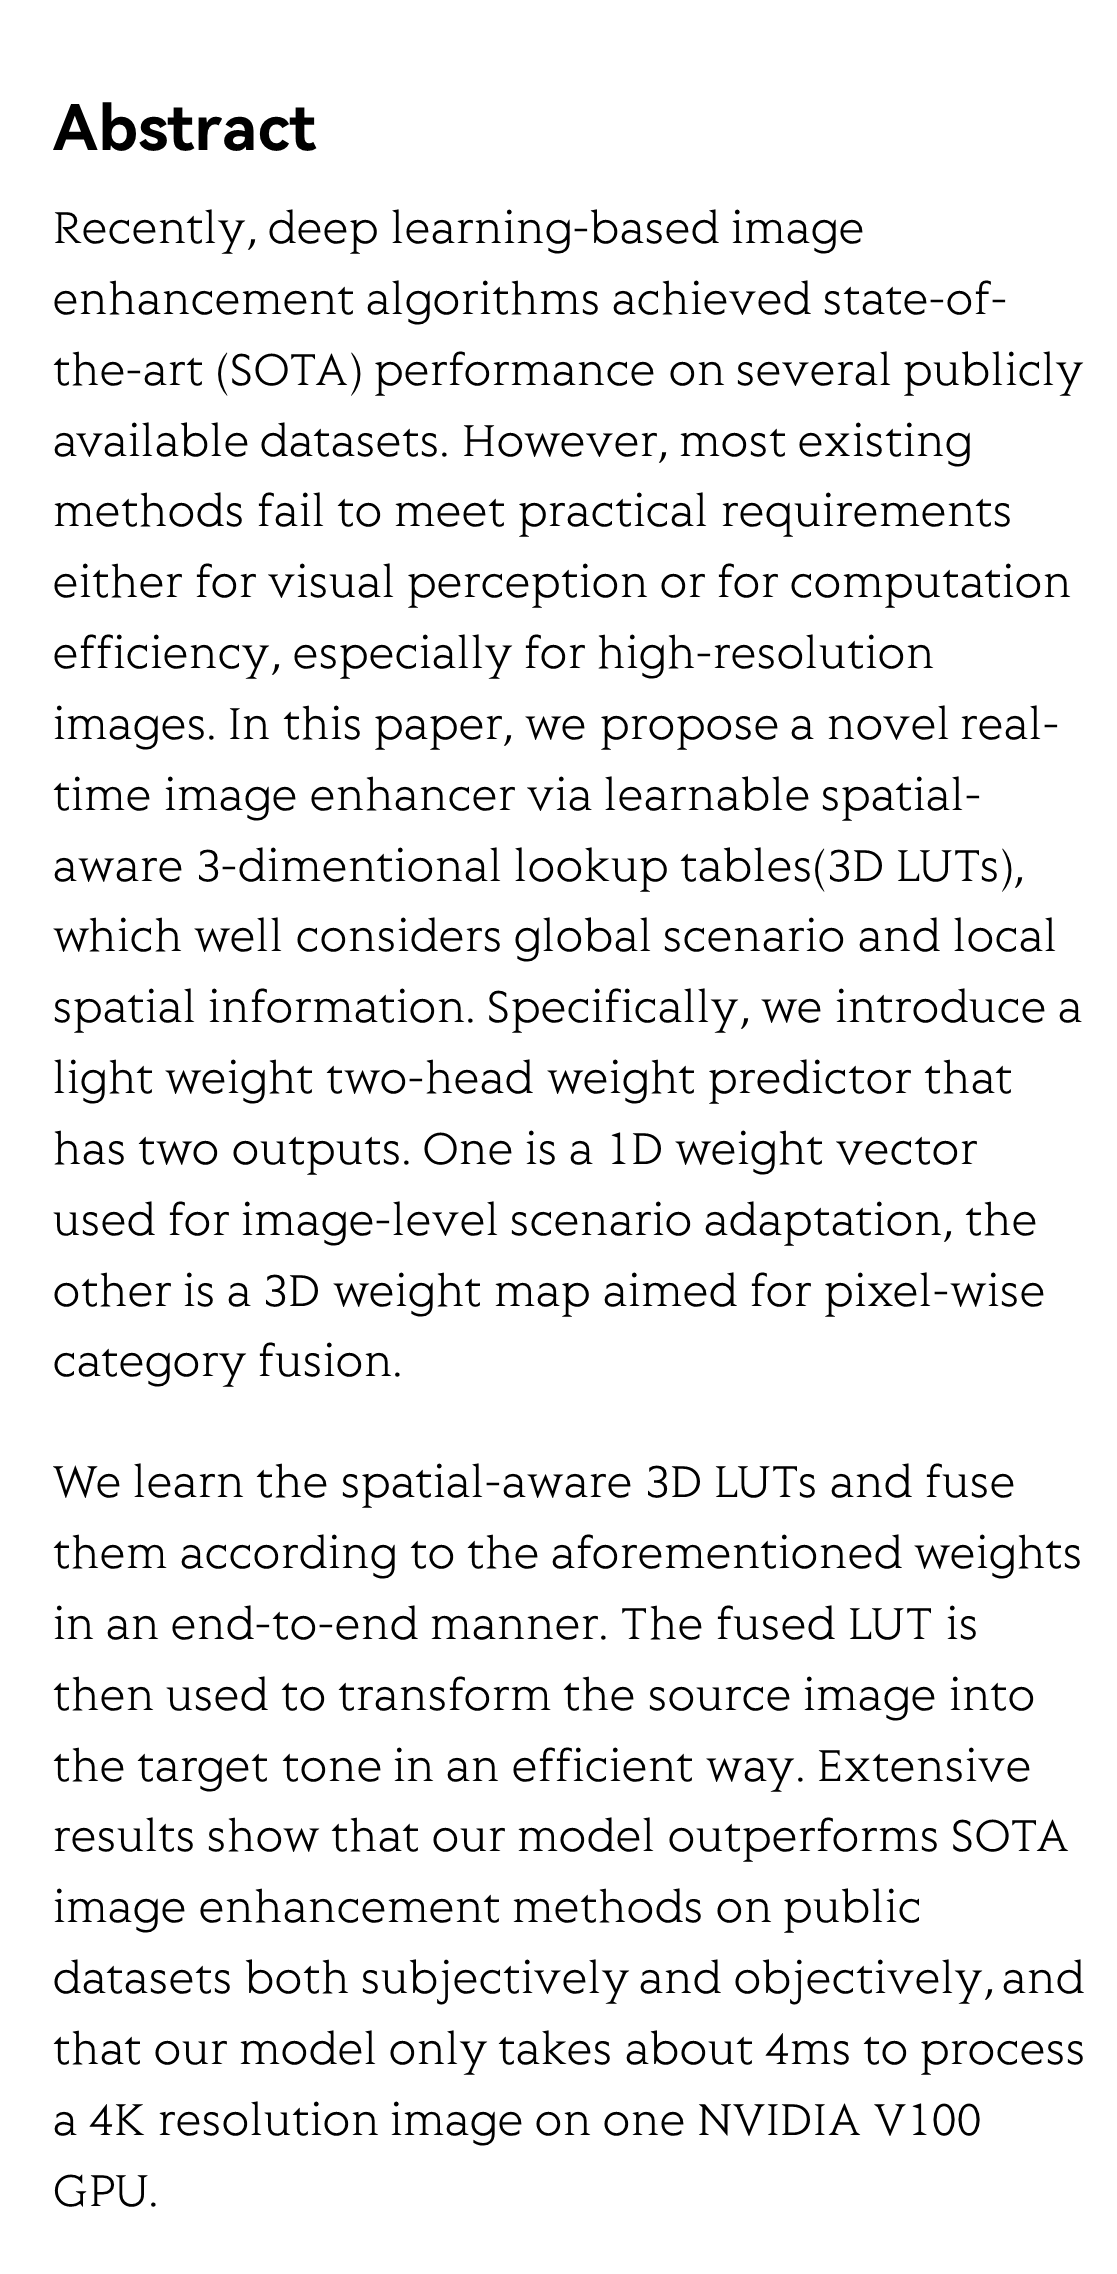 Real-time Image Enhancer via Learnable Spatial-aware 3D Lookup Tables_2